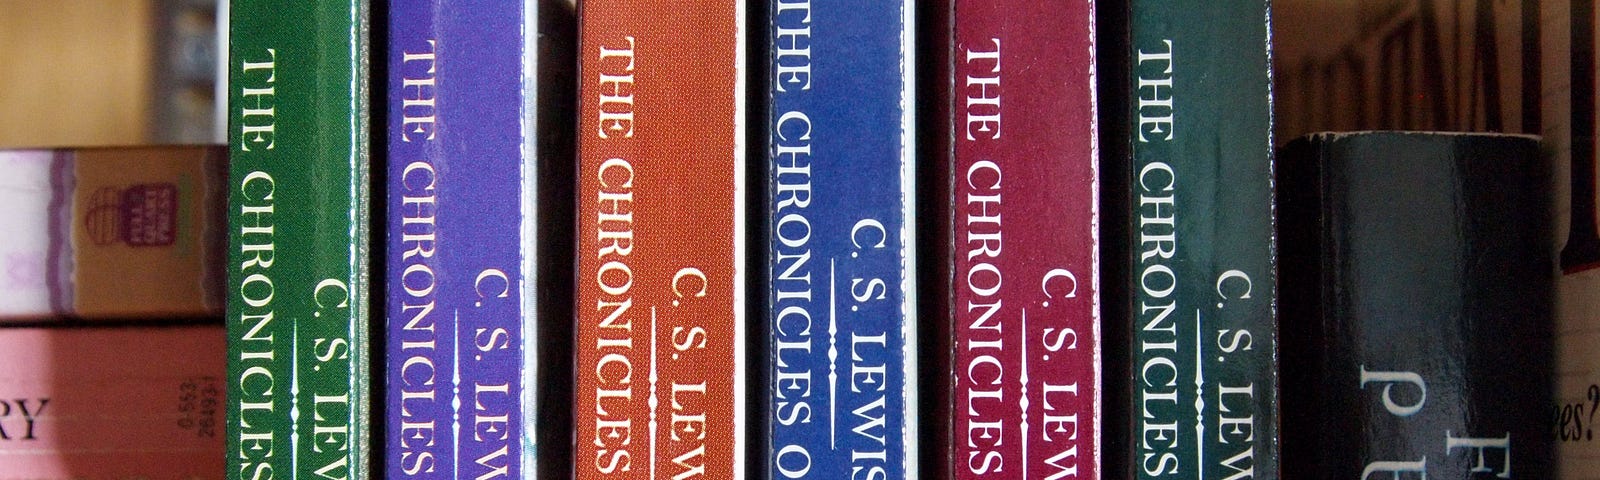 Six copies of The Chronicals of Narnia, by C.S Lewis displayed to show their spines of various colours.